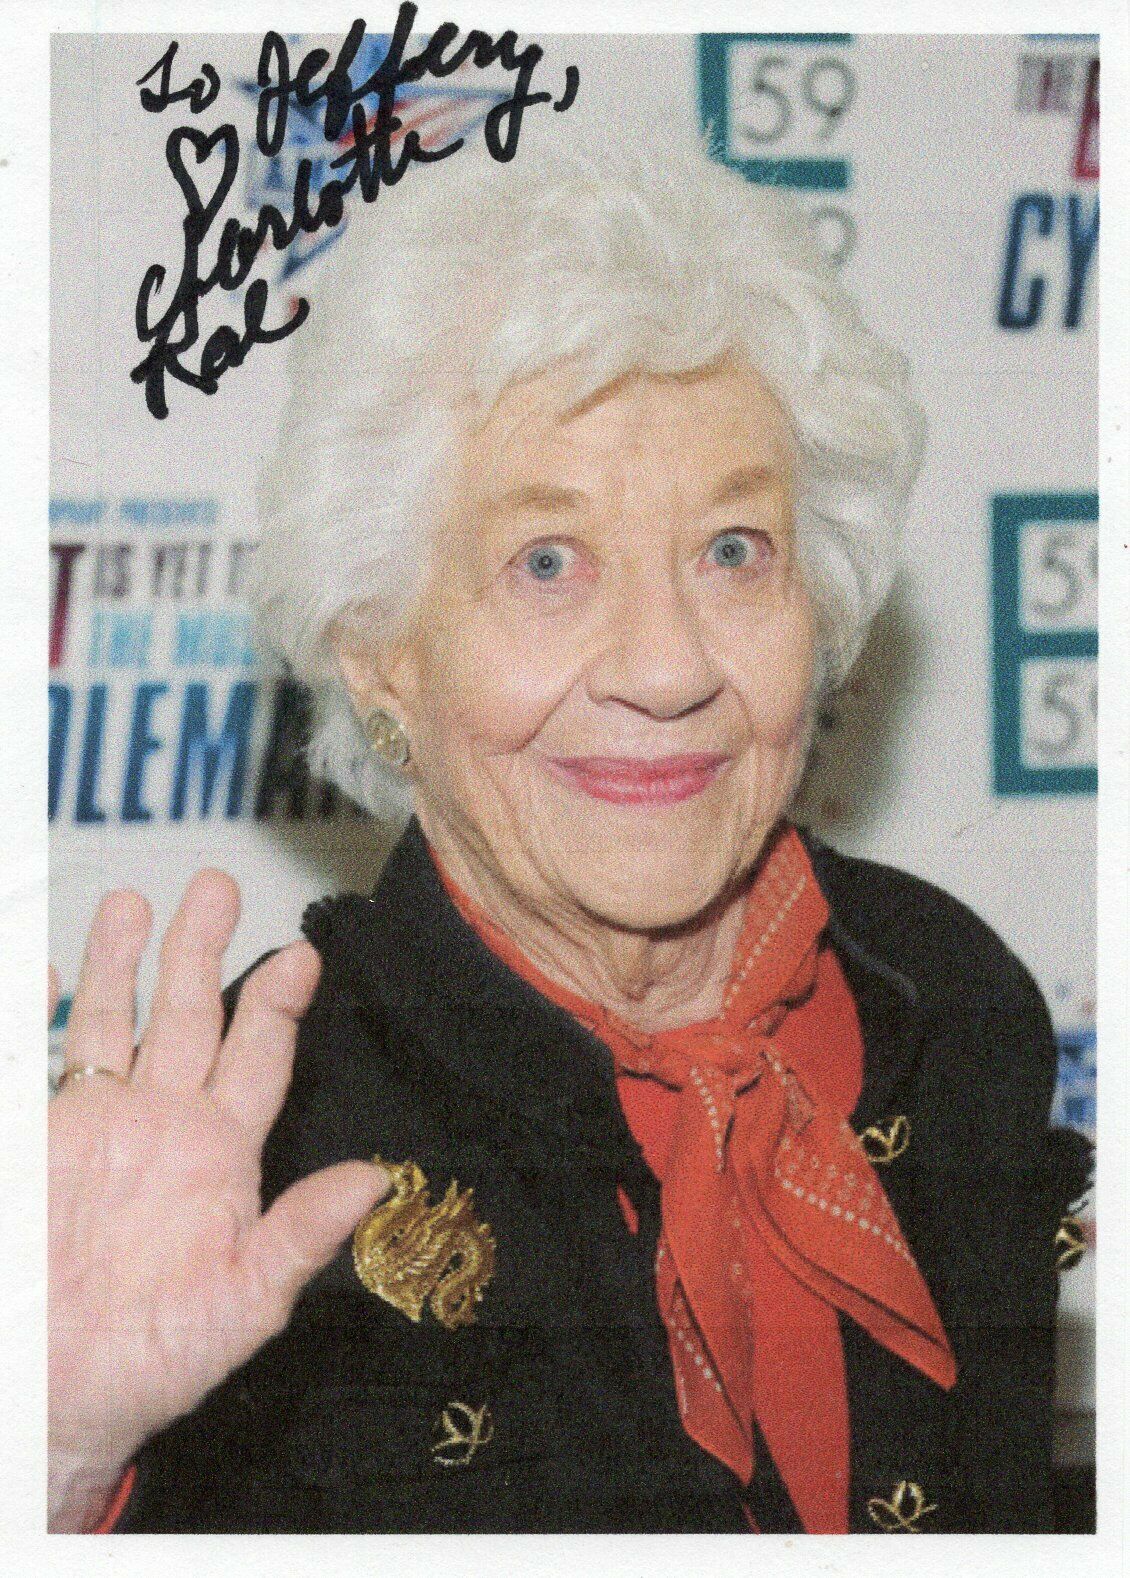 Charlotte Rae Original Autographed 4 x 6 in. Paper Photo Poster painting as pictured